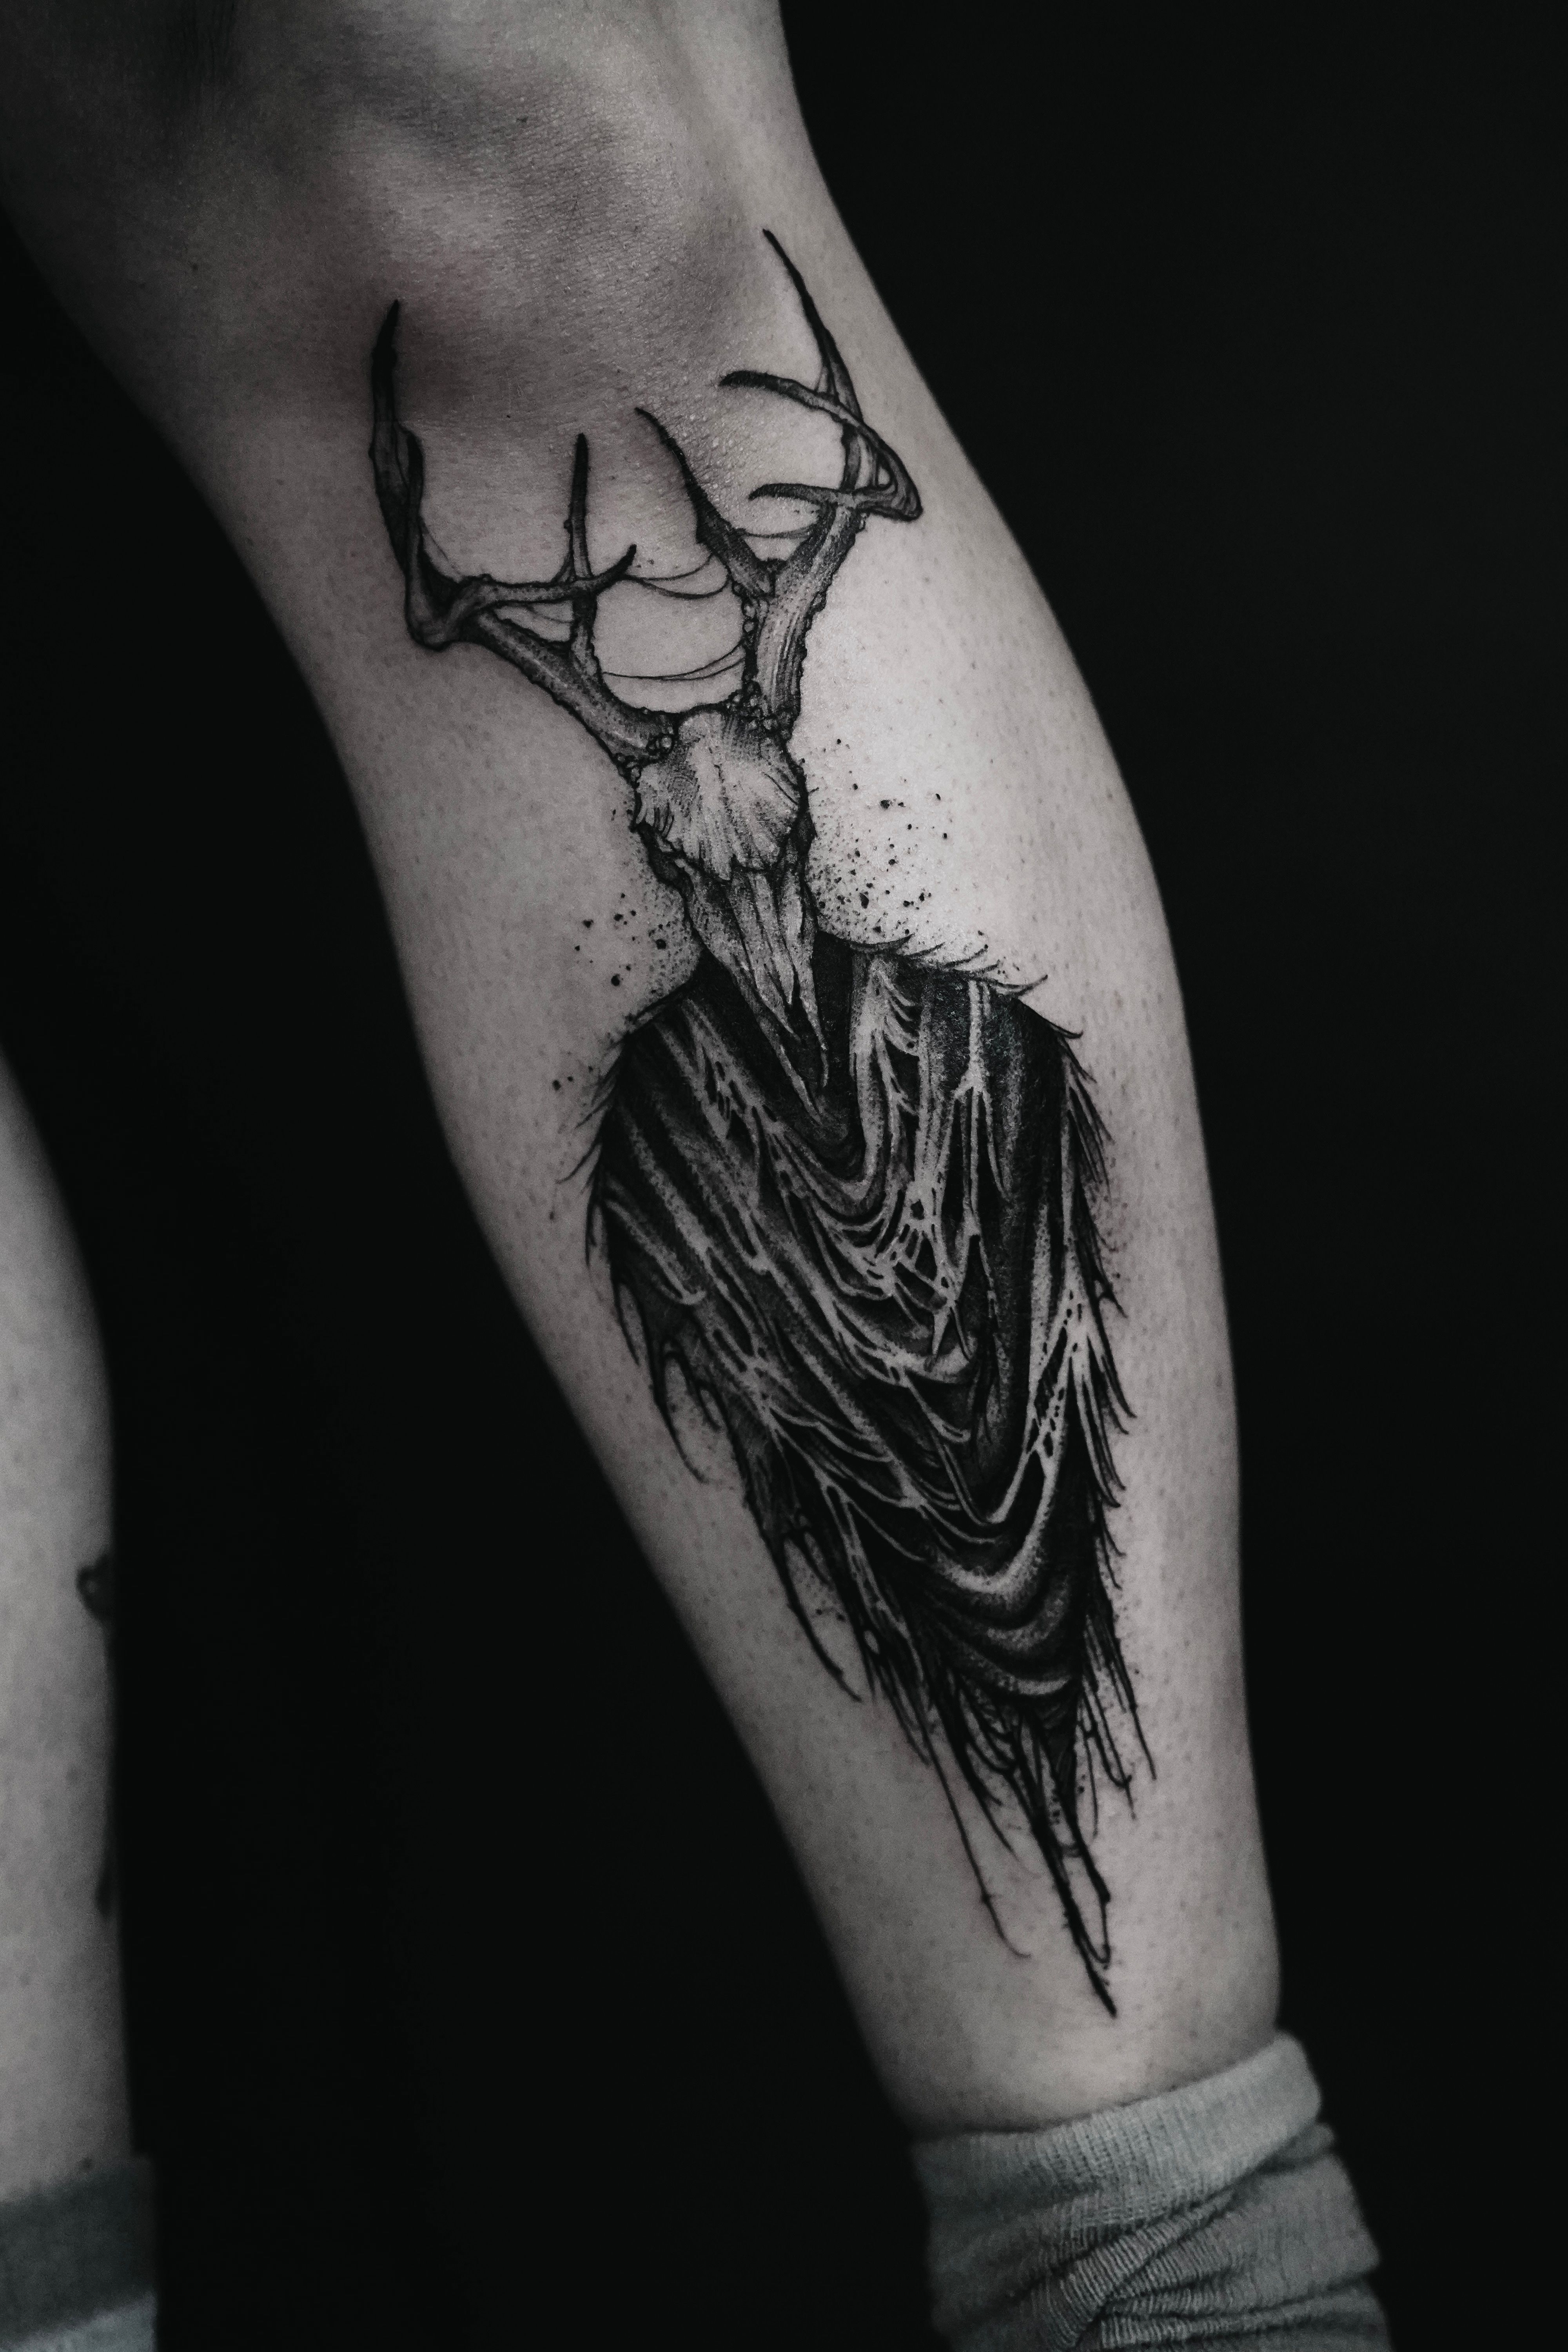 Tattoo uploaded by Les Gants Noirs • Deer skull and mountains • Tattoodo